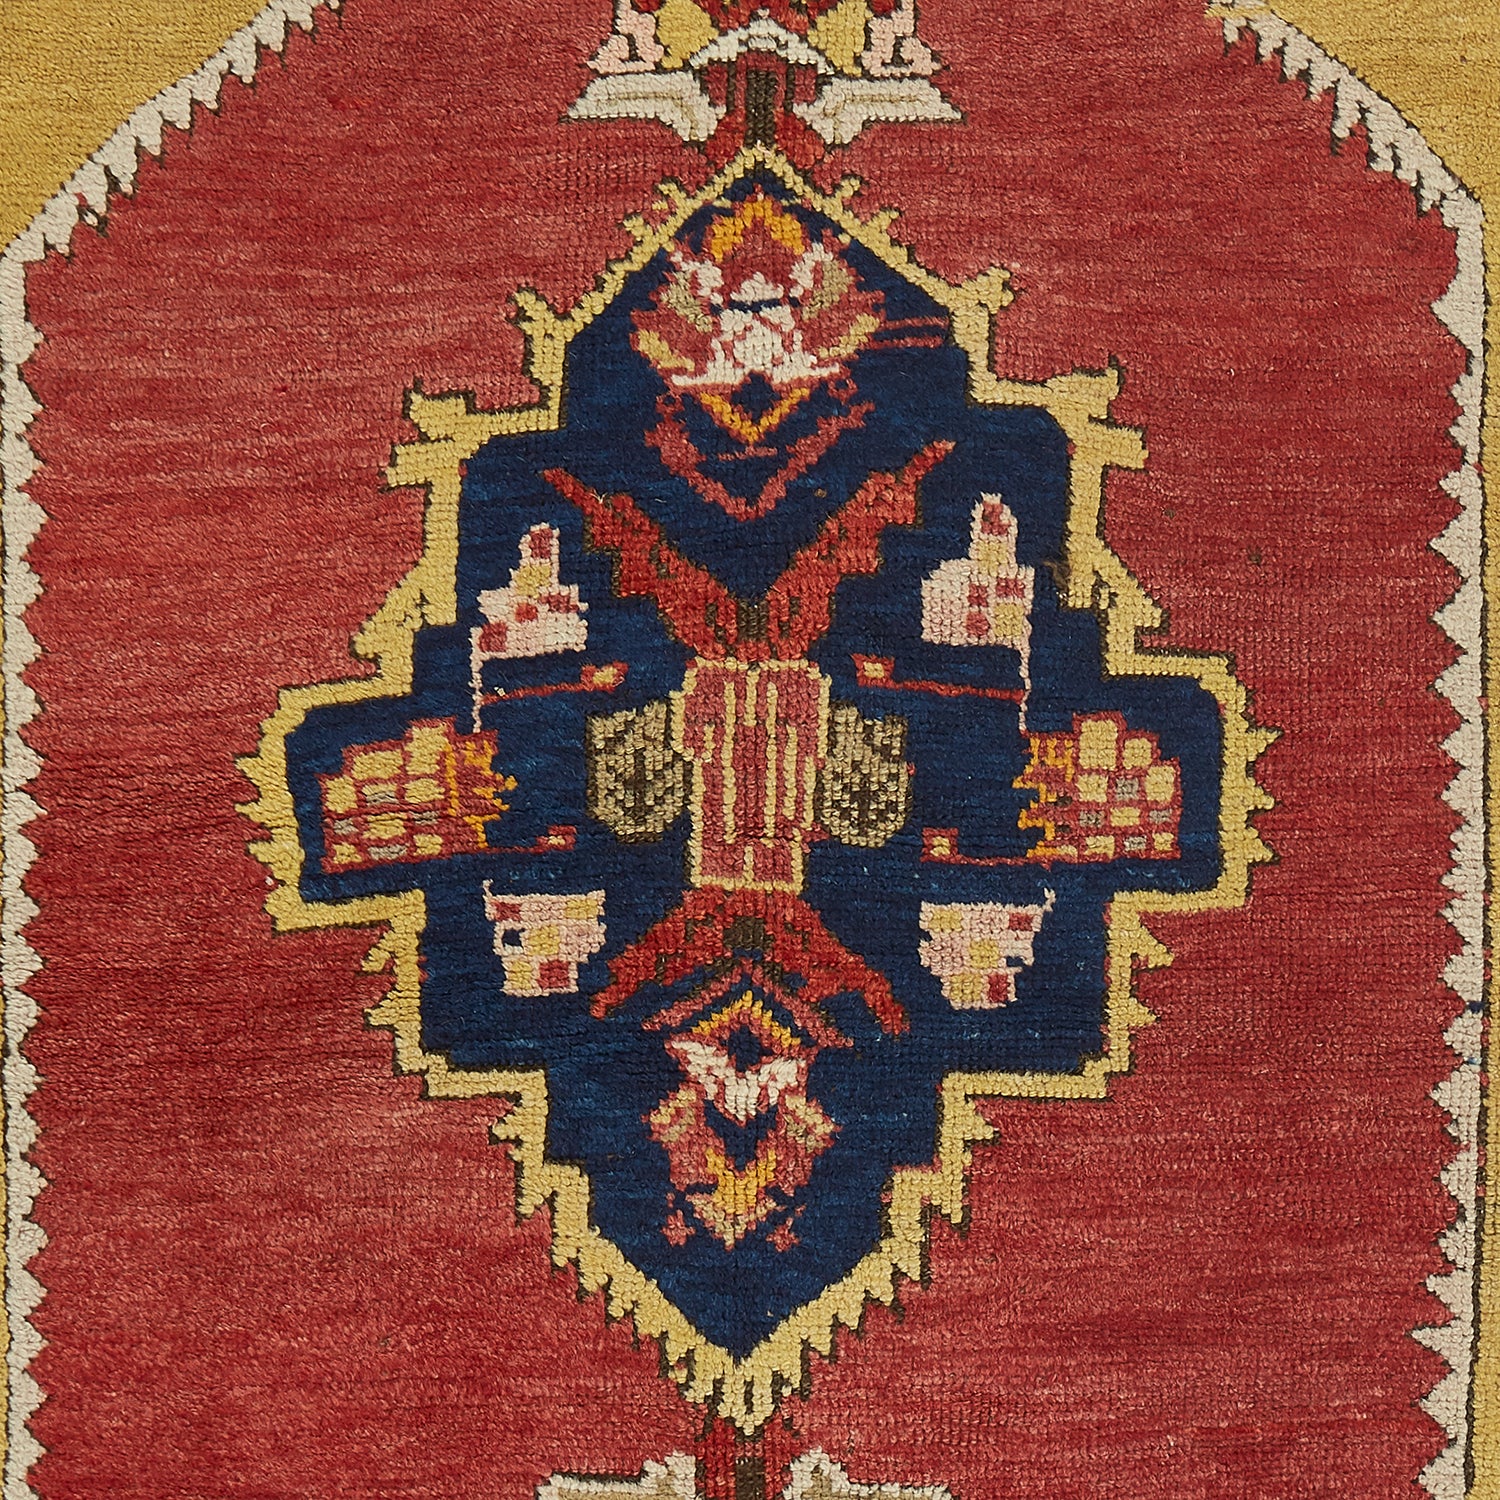 Intricately patterned handwoven rug showcases a symmetrical oriental design.